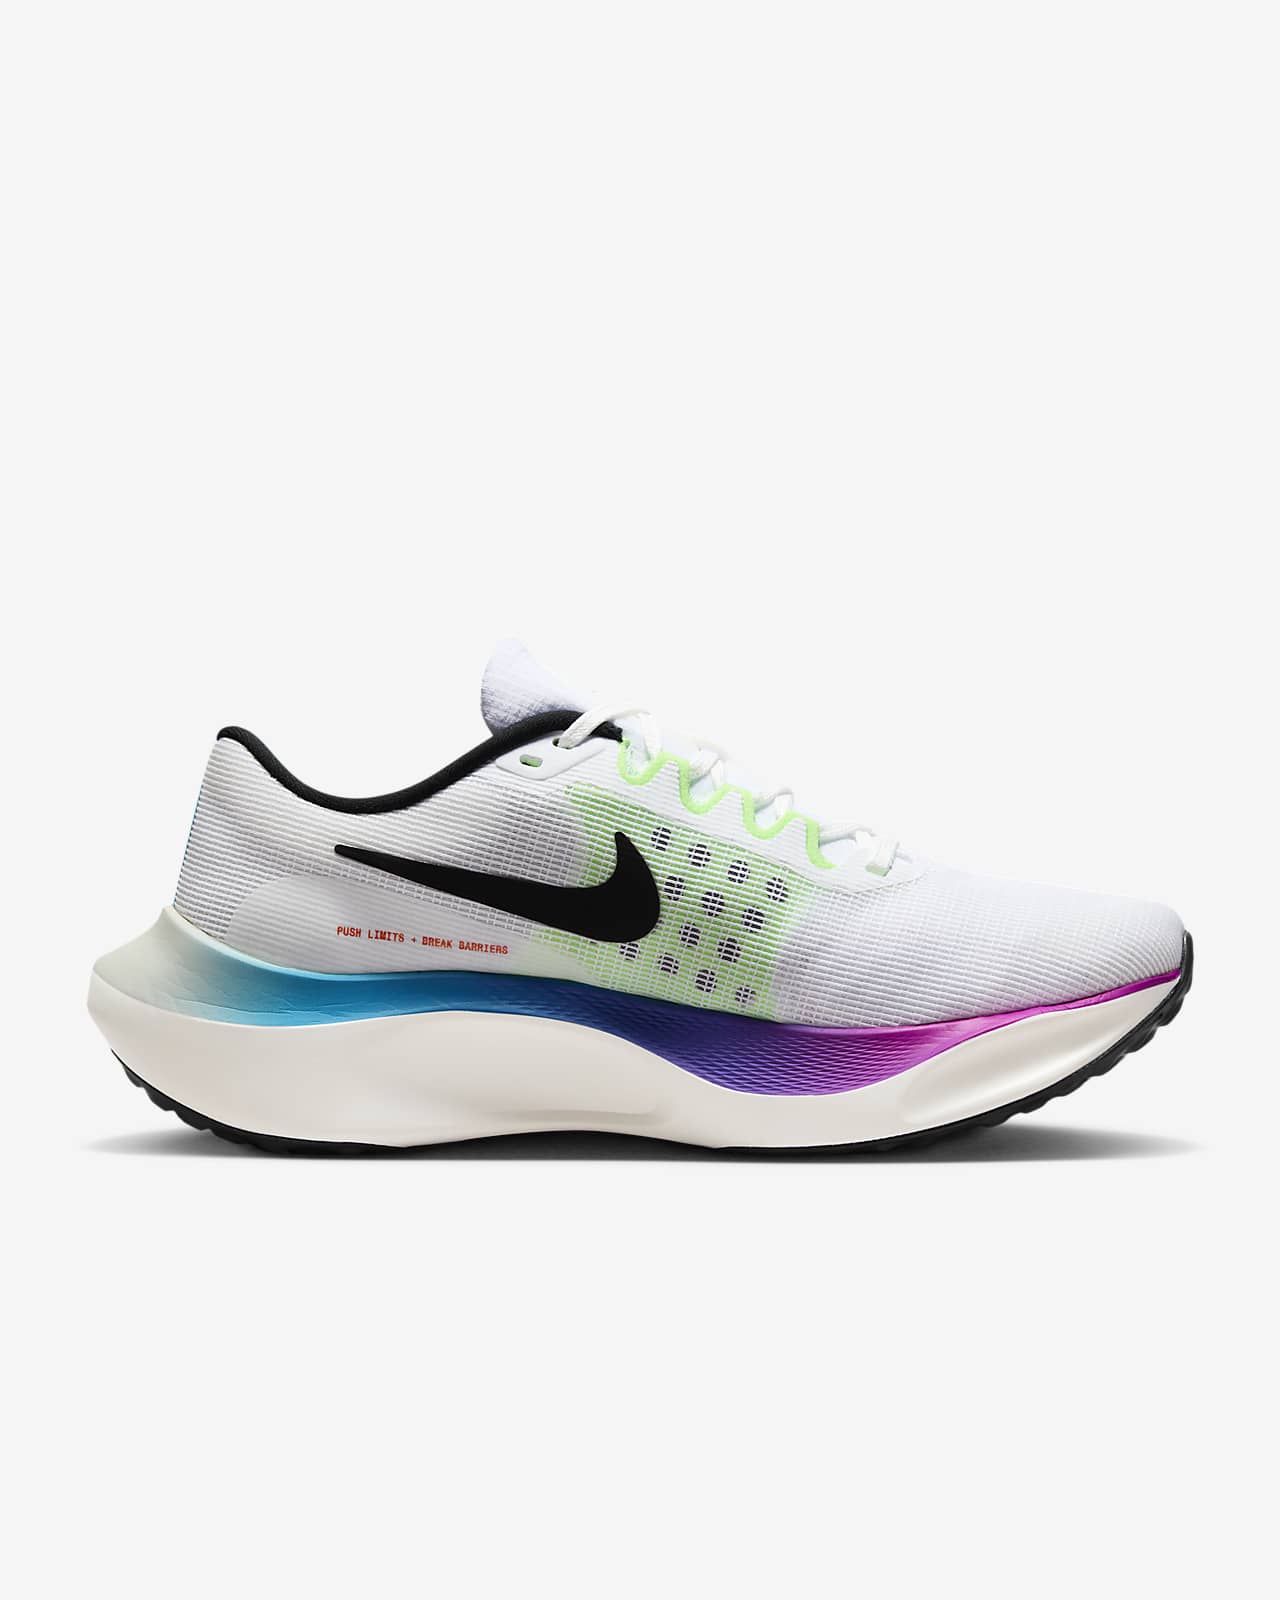 Zoom Fly 5 Men's Road Shoes.